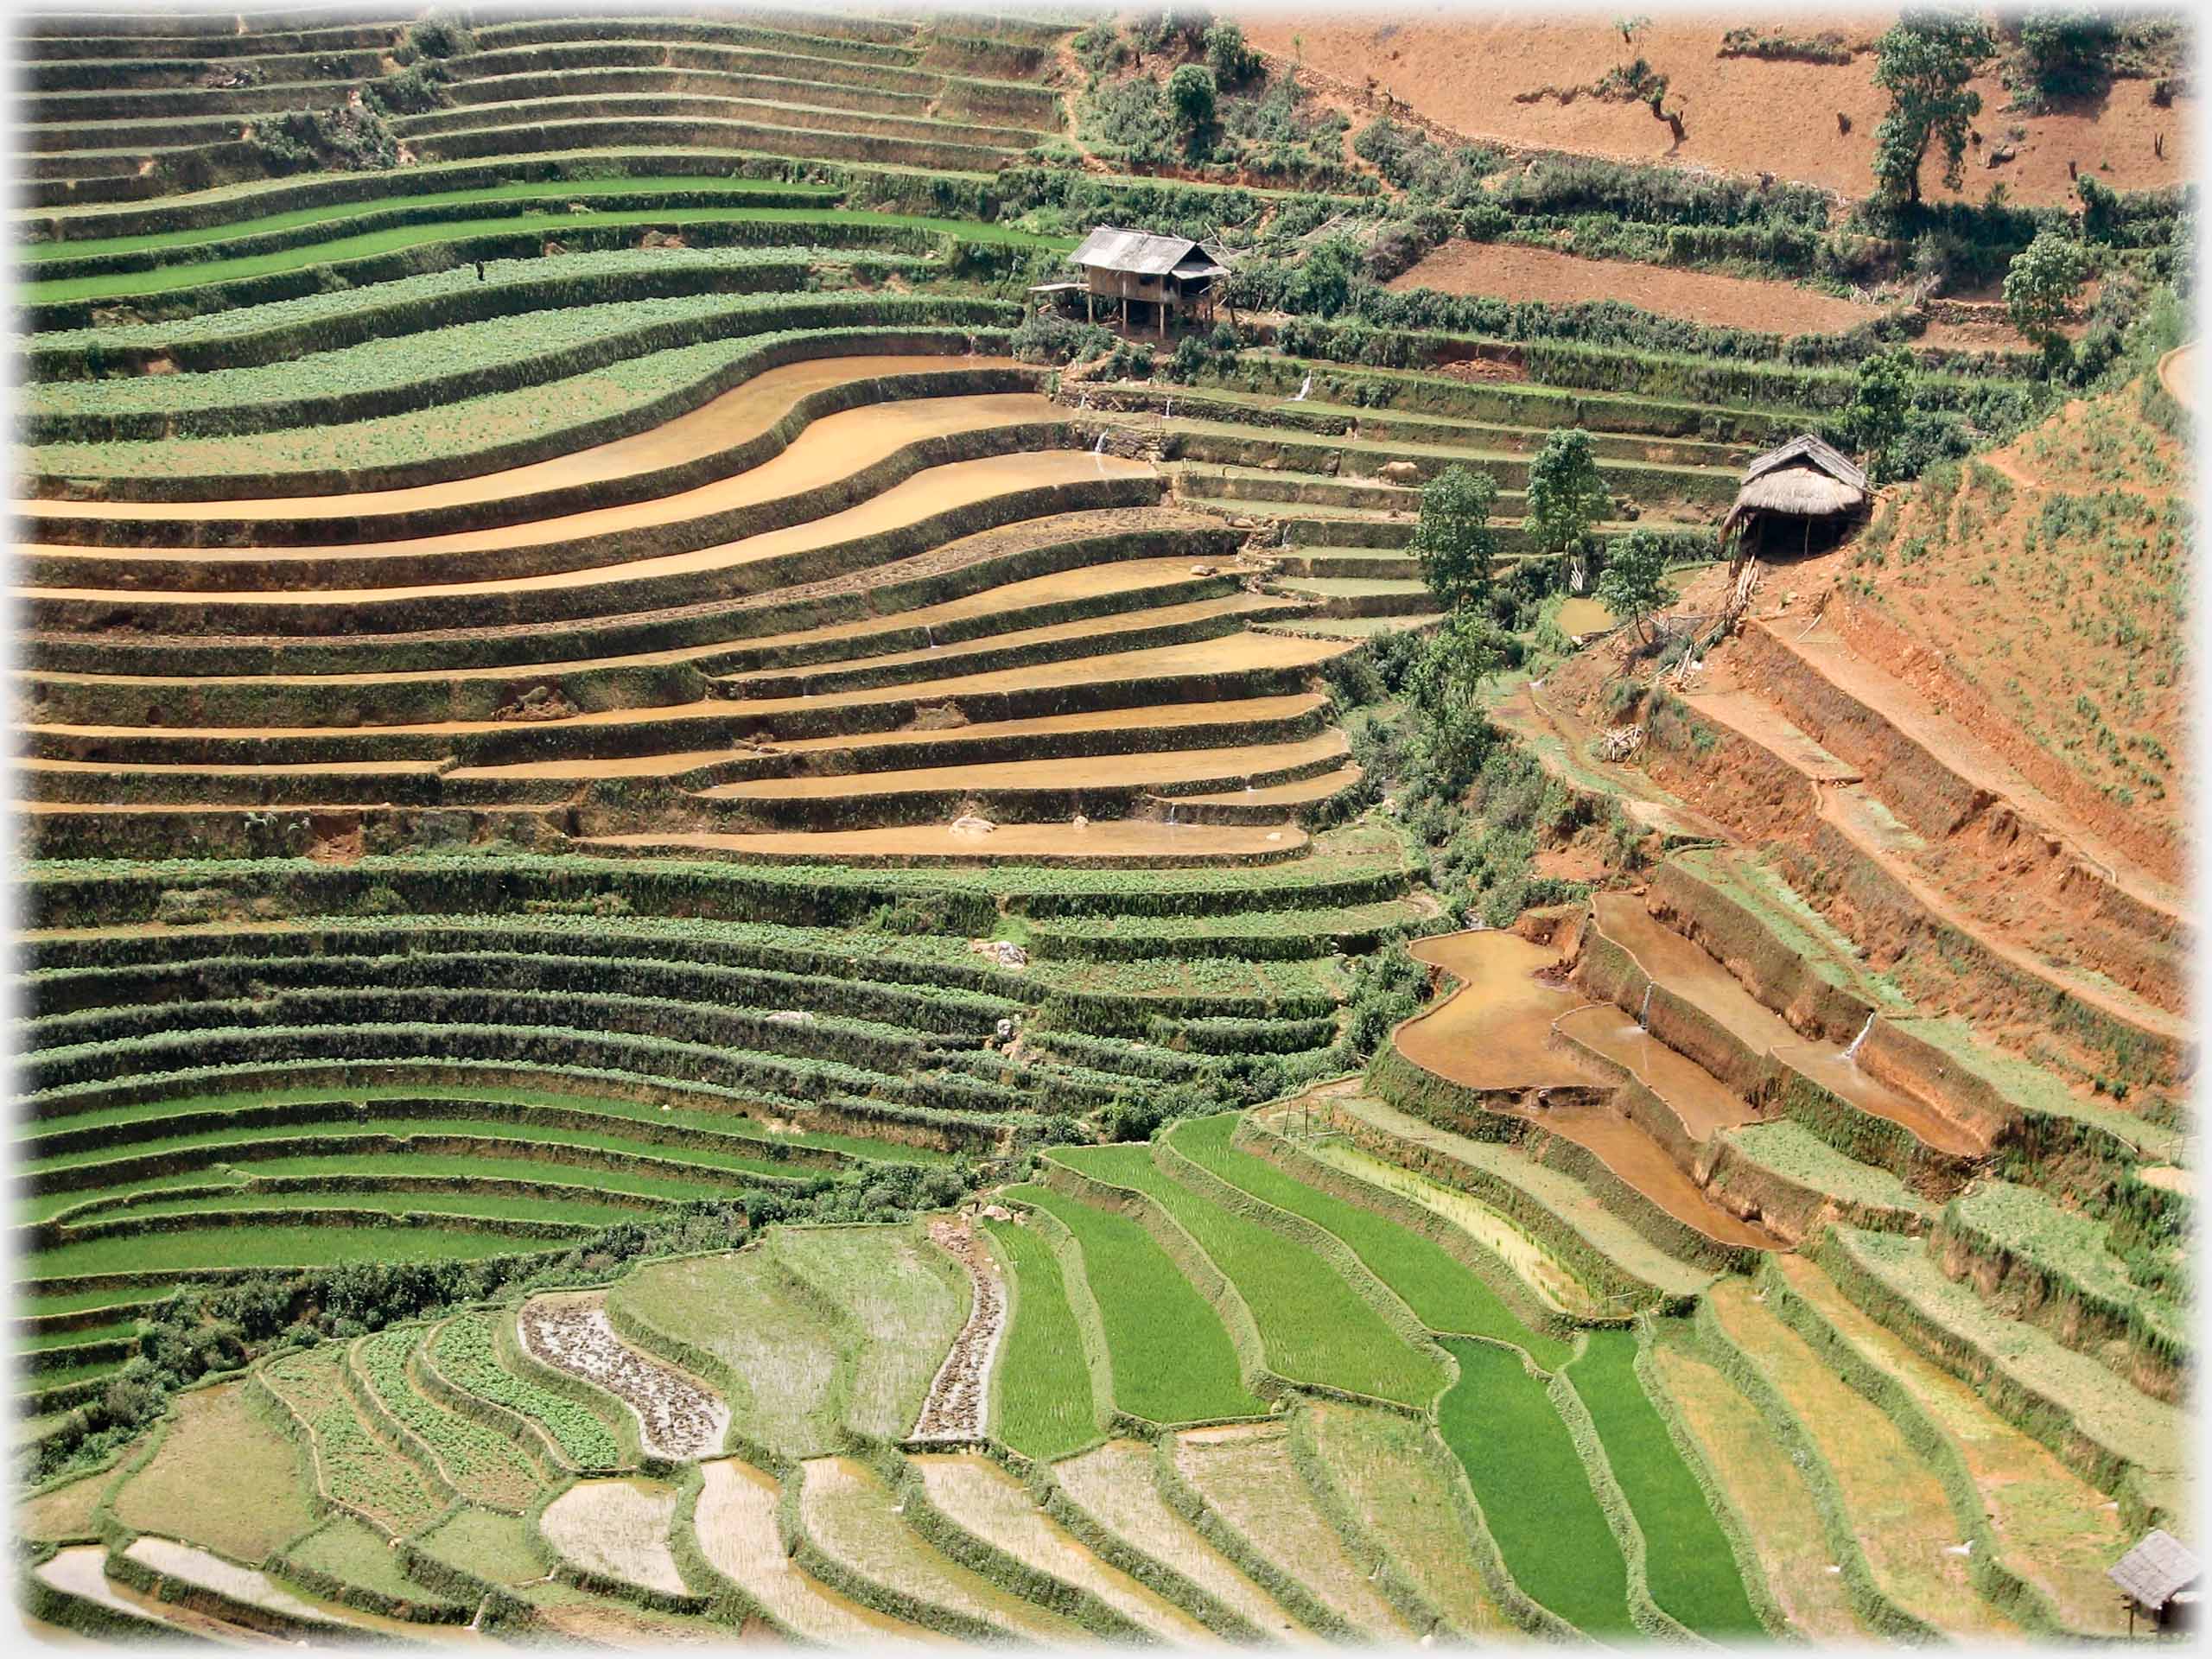 Dense pattern of curved terraces in side valley.